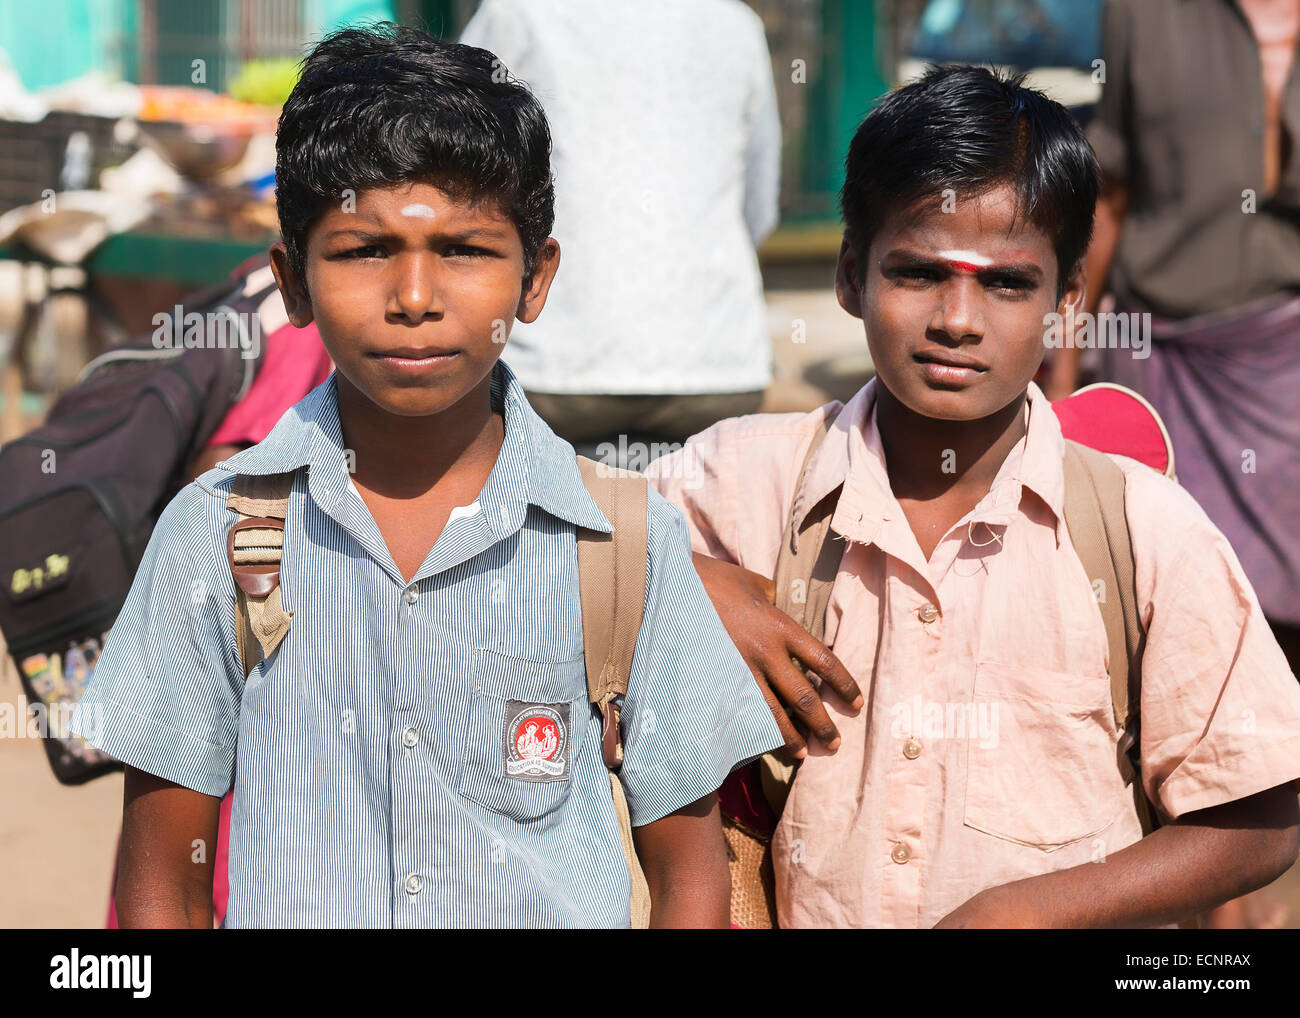 Two young Tamil Schoolboys. Stock Photo